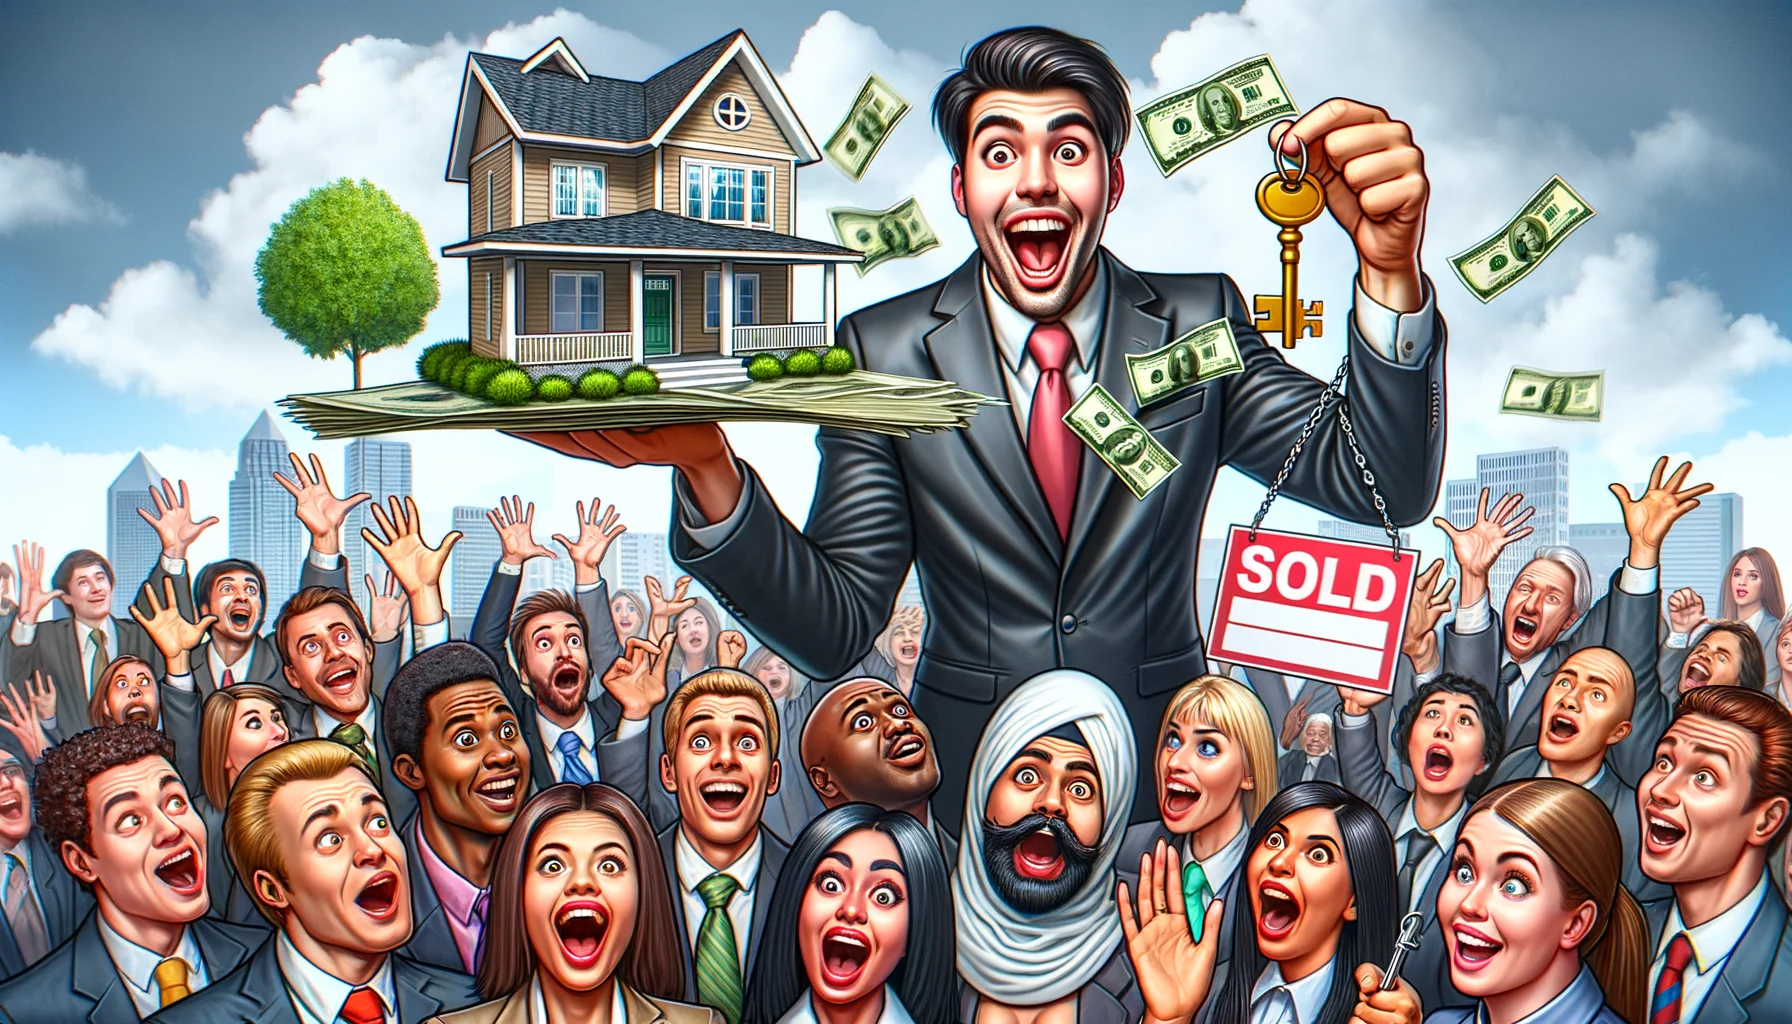 Create a comical, realistic image of home buying in a seller's market. Picture a male Caucasian first-time buyer, wearing a suit and looking extremely excited, holding an oversized dollar bill in one hand, a giant key in another, with a ridiculously small house perched on his palm as his 'purchase'. A Hispanic female agent in professional attire is depicted holding a huge SOLD sign with a gigantic grin. They are surrounded by eager potential buyers, a mix of Black, Middle-Eastern, and South Asian individuals, with hilarious expressions of disbelief, shock, and envy.